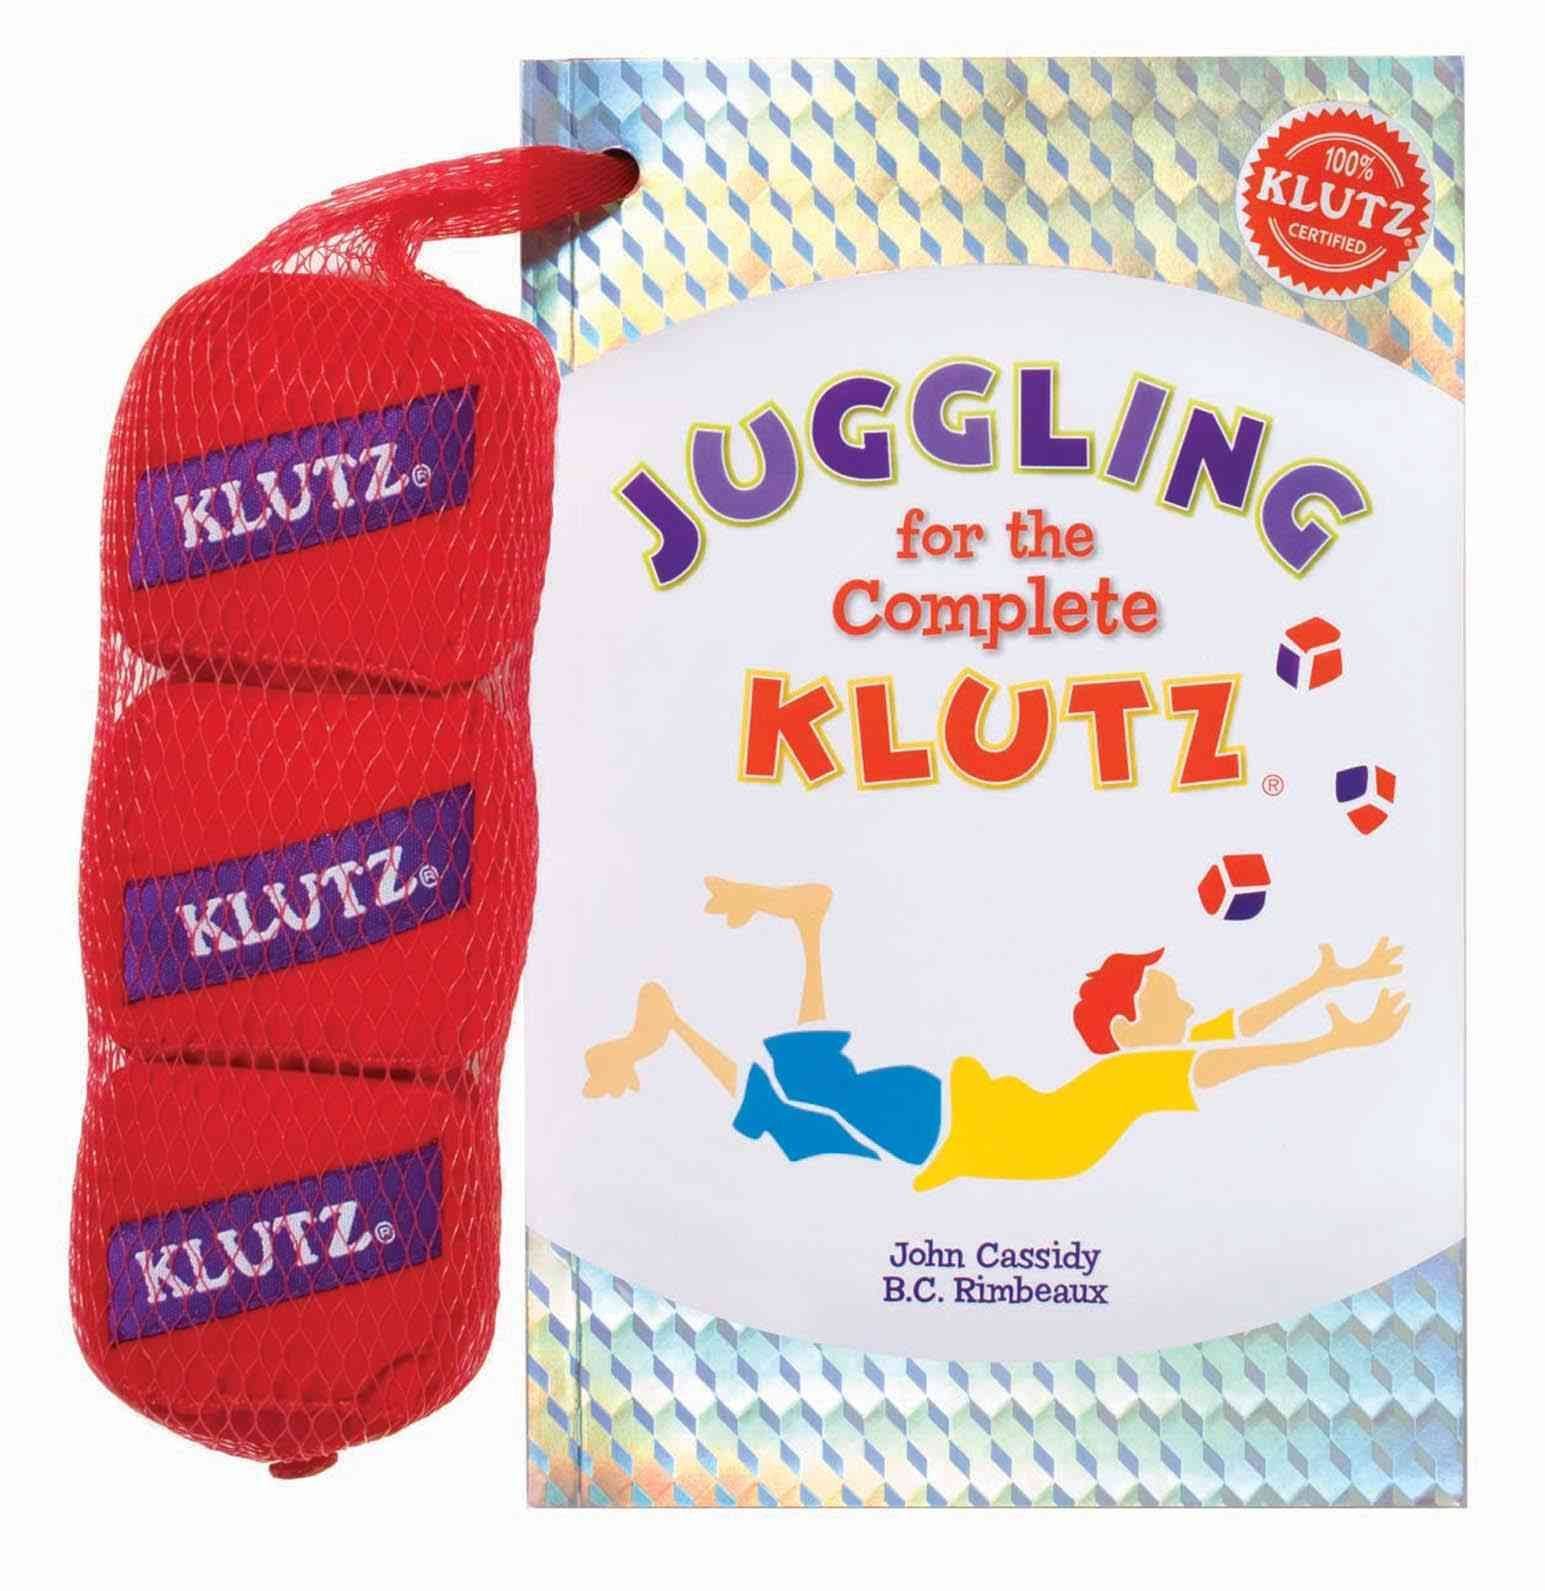 Juggling for the Complete Klutz: 30th Anniversary Edition